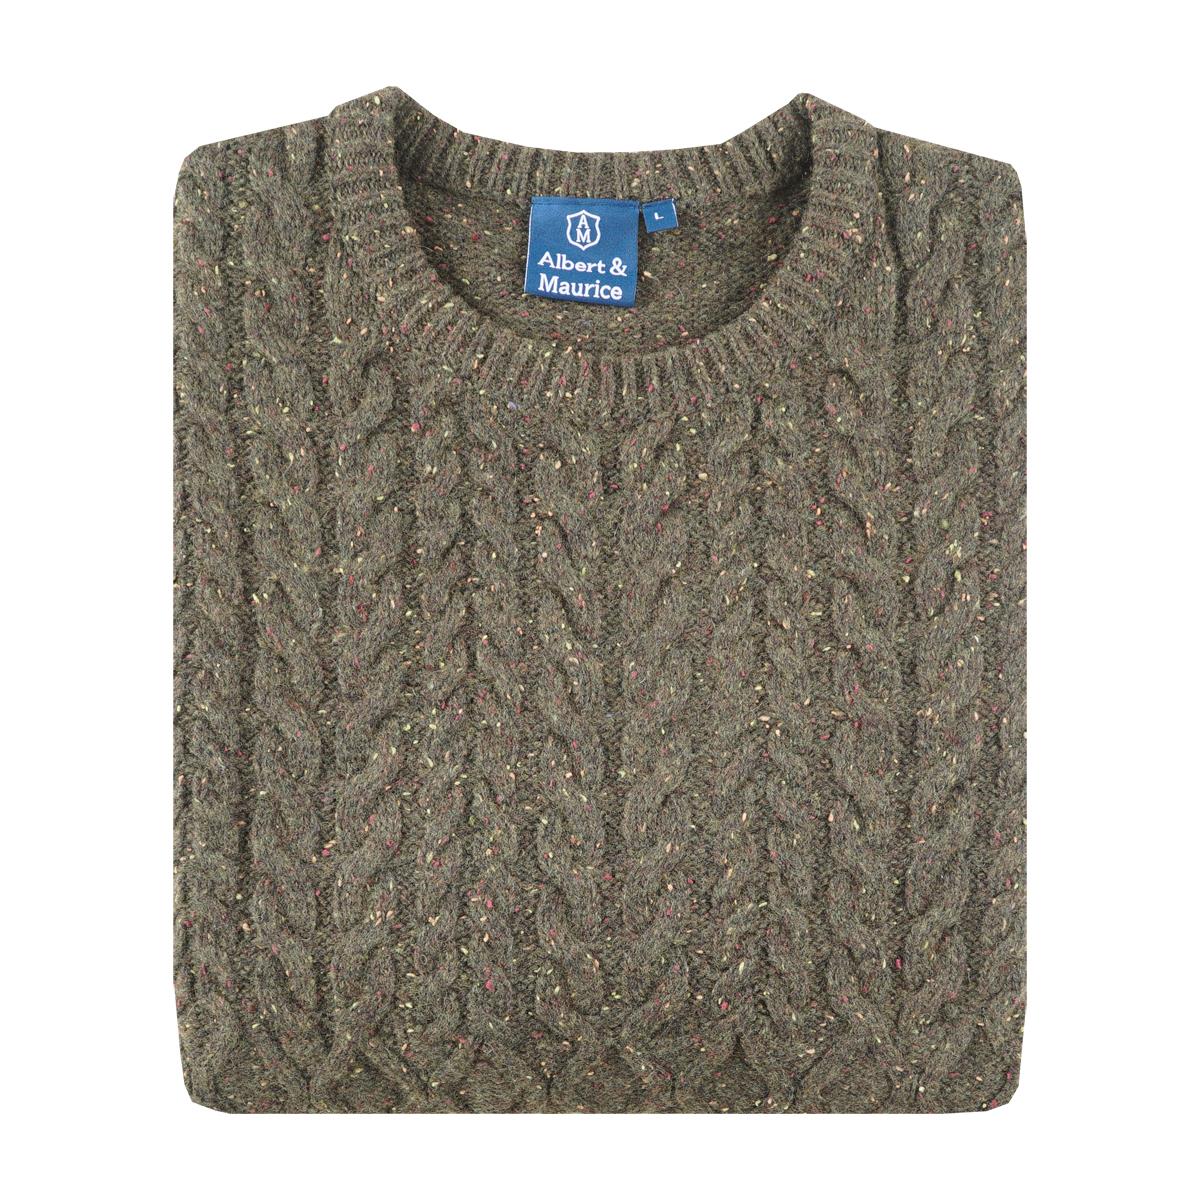 What's the sleeve length in XL size on the Albert and Maurice Mens Ledbury Knit Crew Neck Jumper?